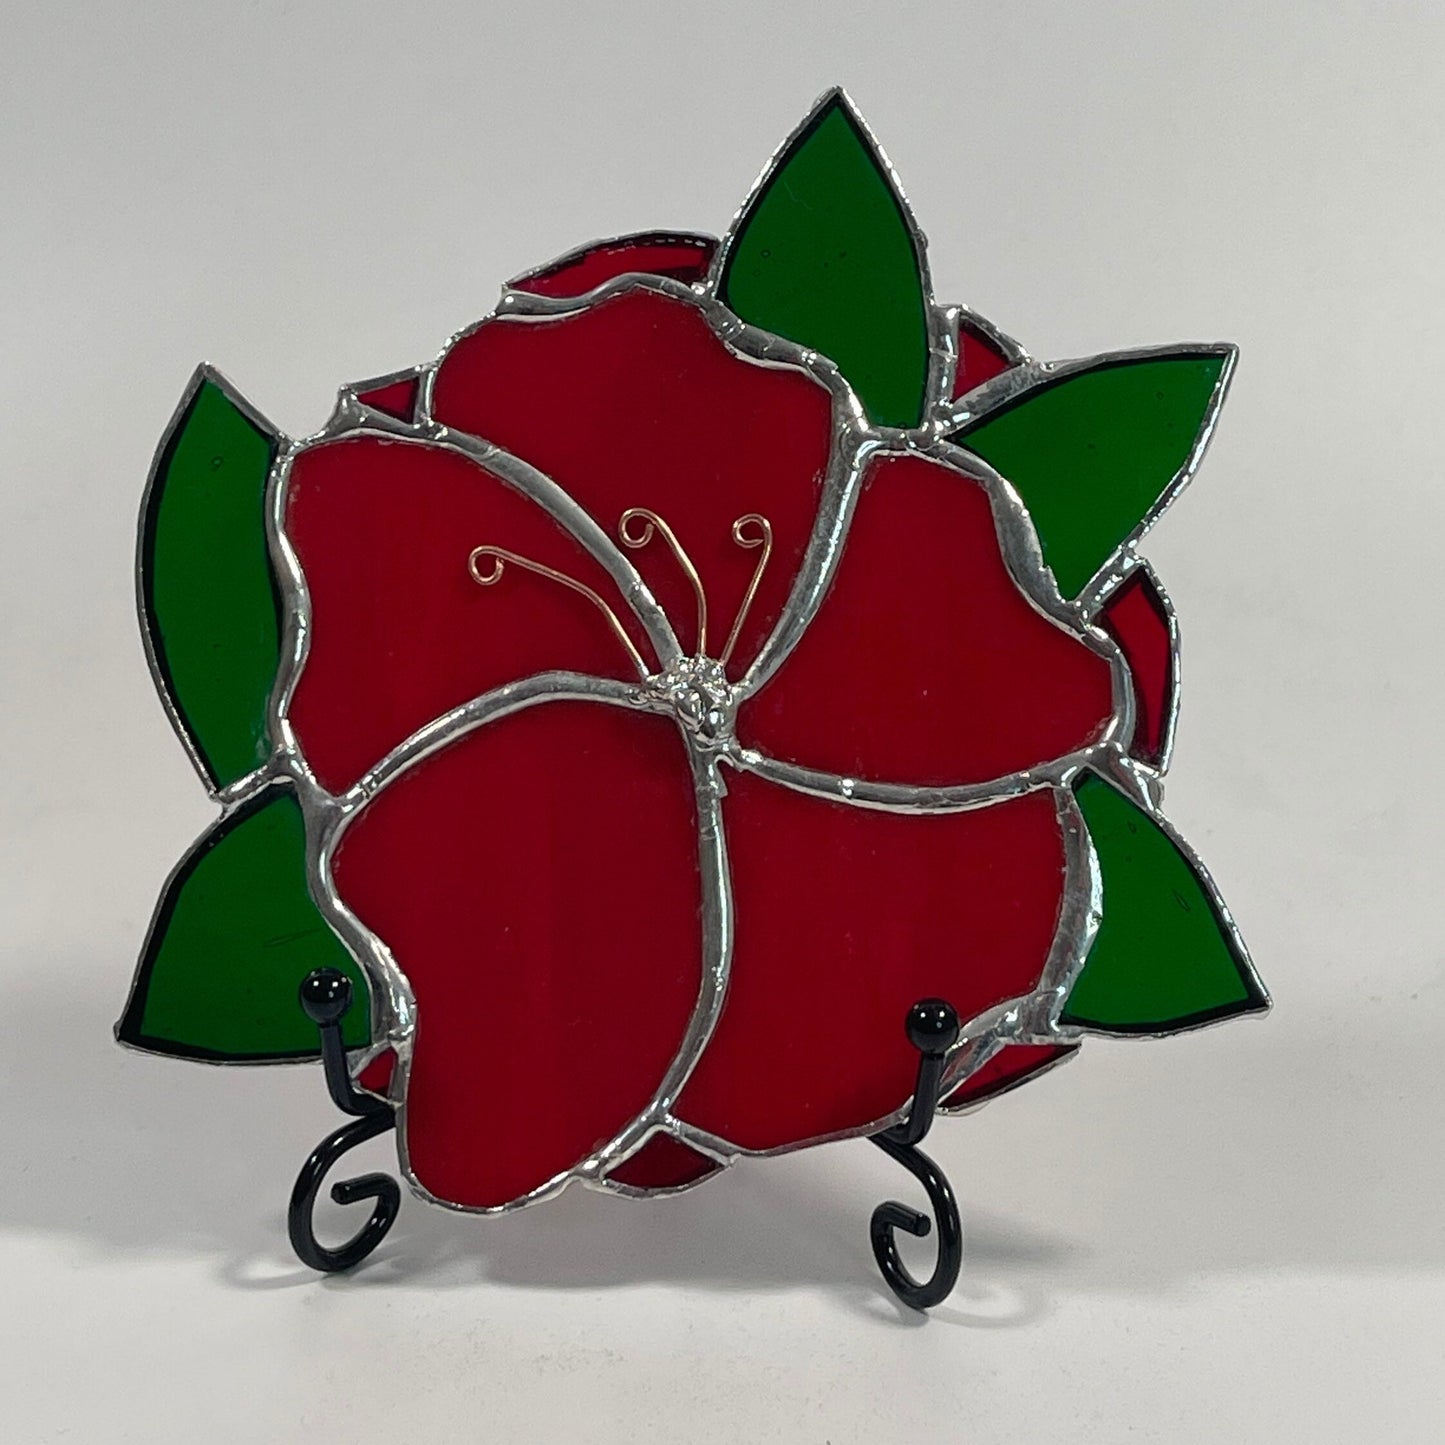 Stained glass rose with stand home decor | Unique flower gifts for her